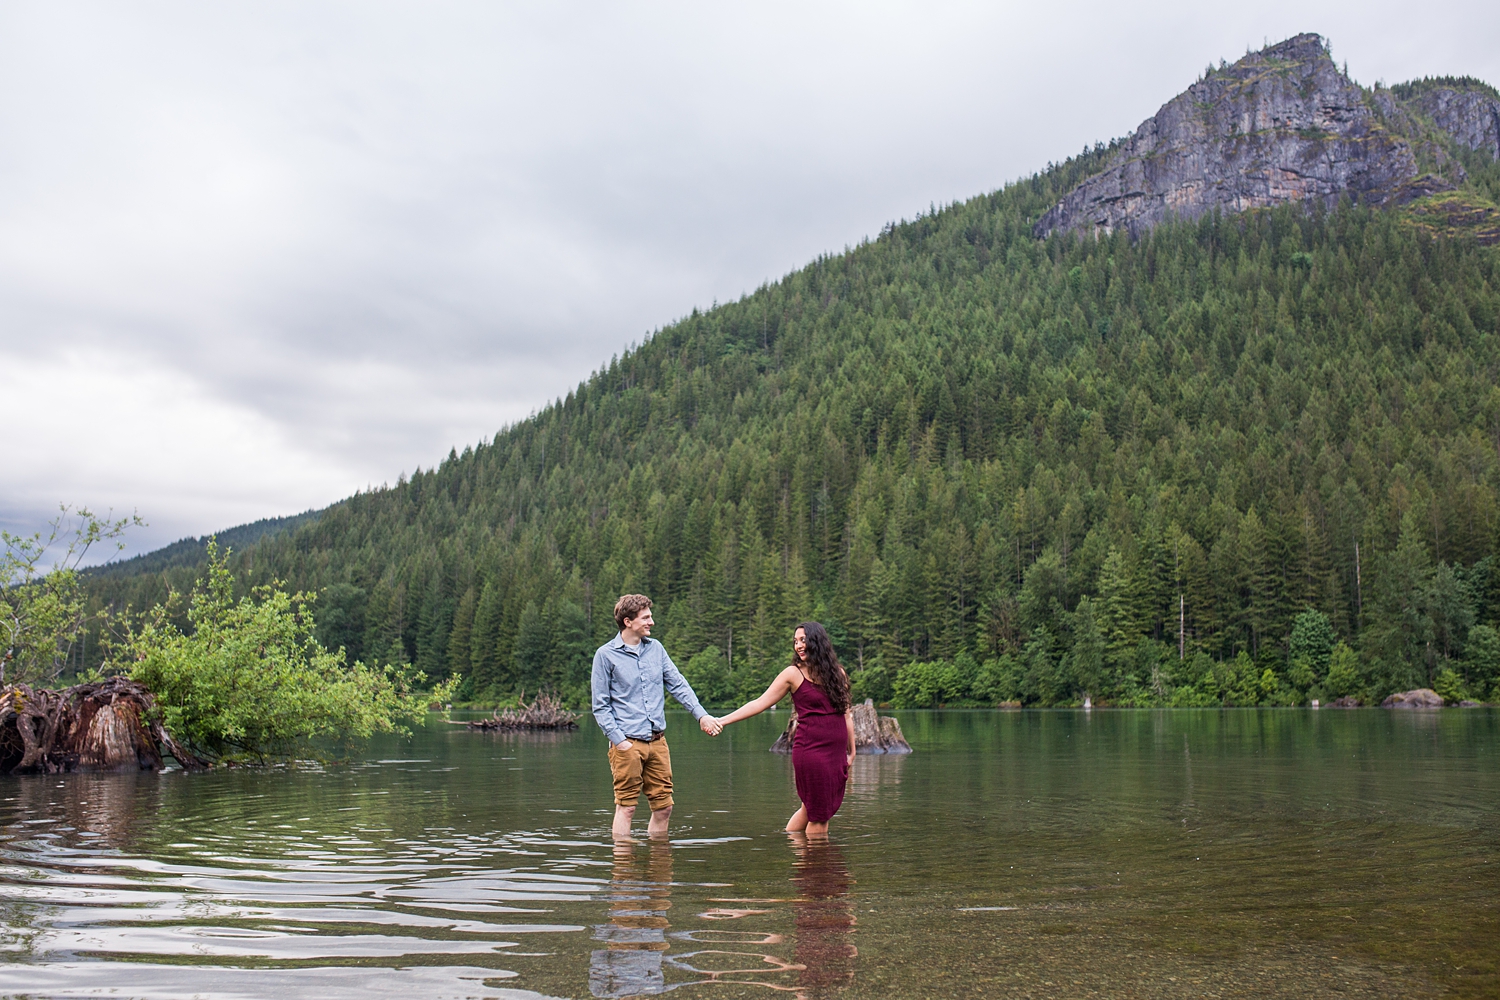 Tips for choosing the location for your engagement pictures: head to water.